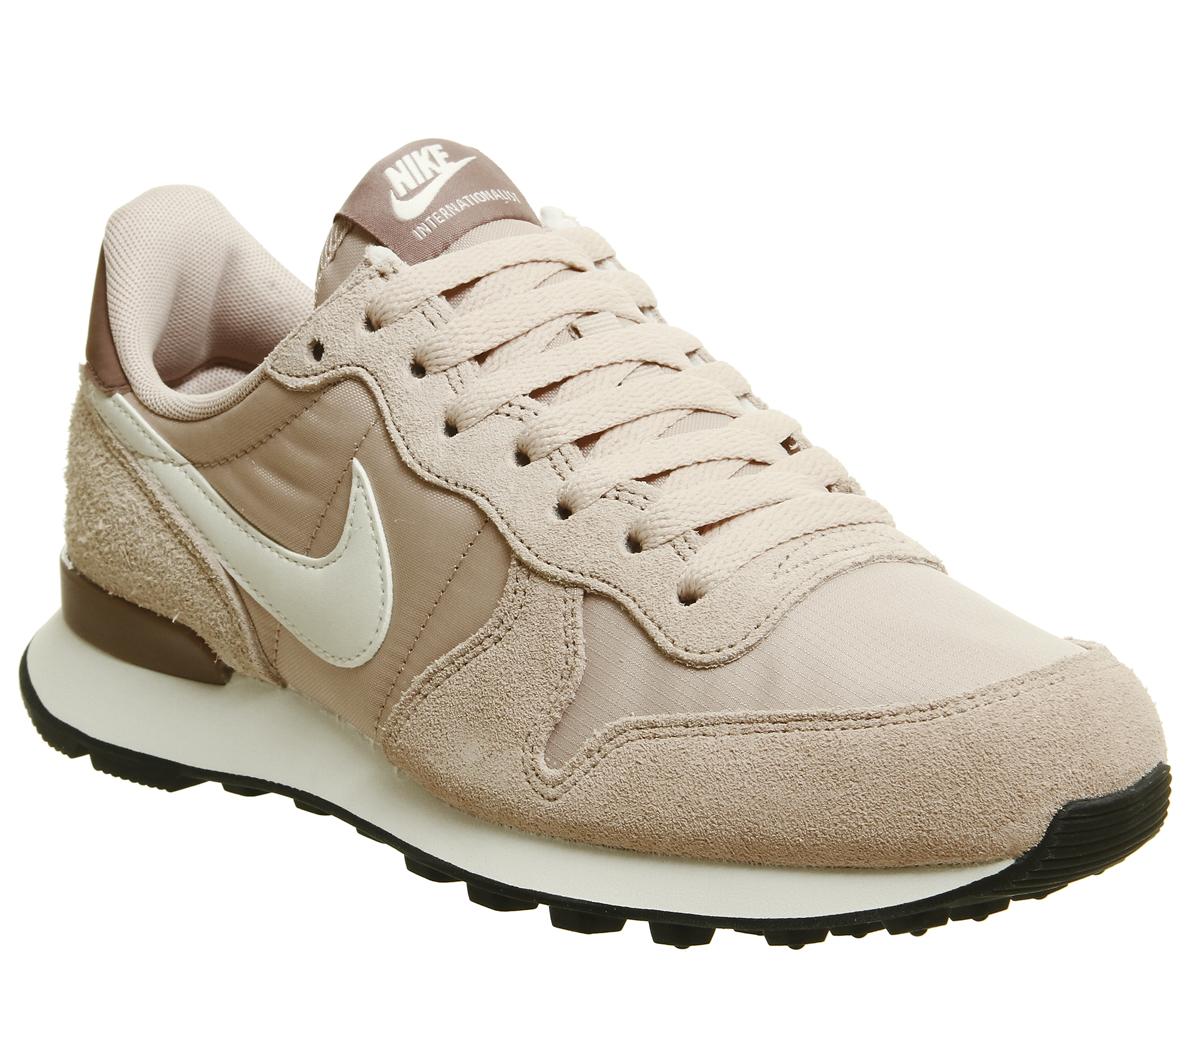 Nike Internationalist 39 Outlet Online, UP TO 60% OFF